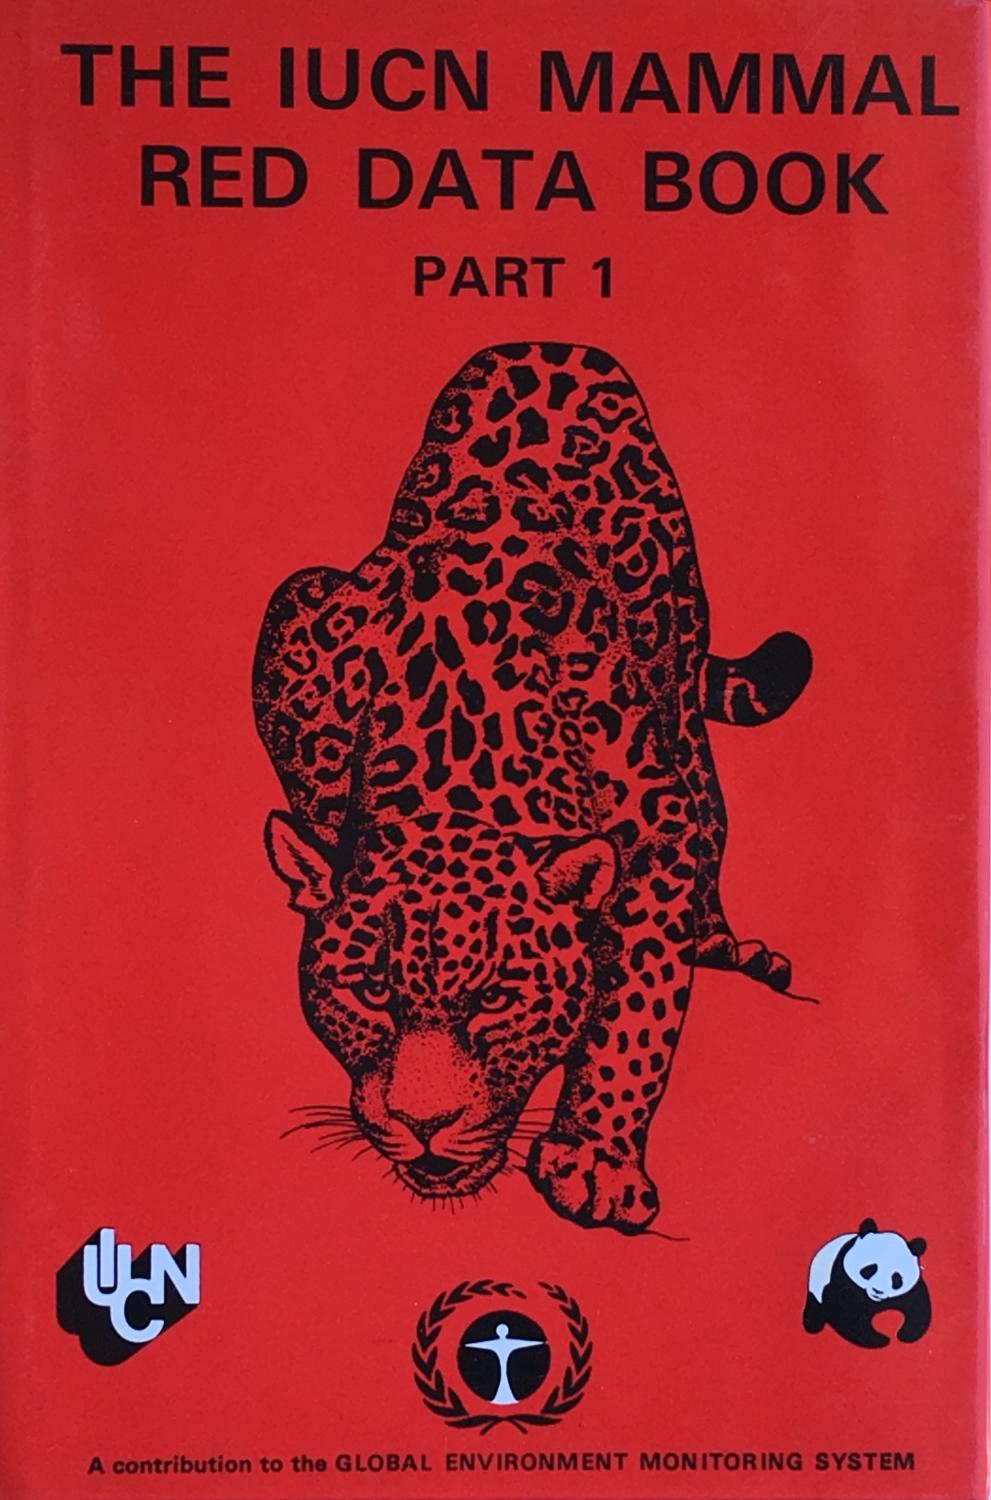 The Iucn Mammal Red Data Book Part 1 By Thornback J Jenkins M V G Hard Covers No Dust Jacket 1982 1st Edition Acanthophyllum Books